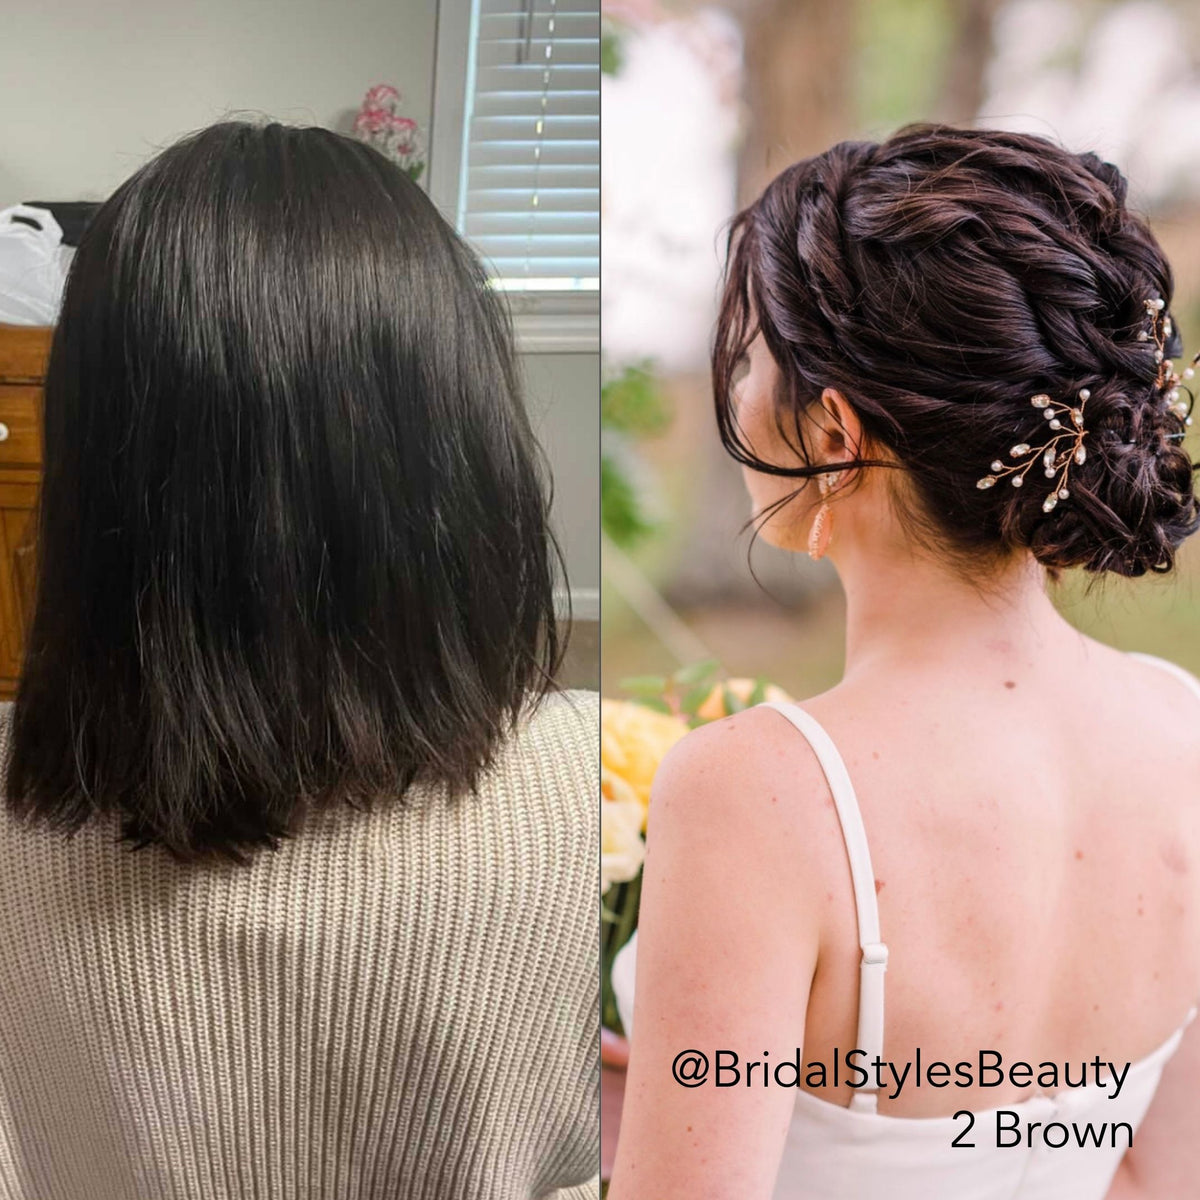 Brown Short Hair Easy UPdo showing Before and After transformation photos using Easy Updo Extensions